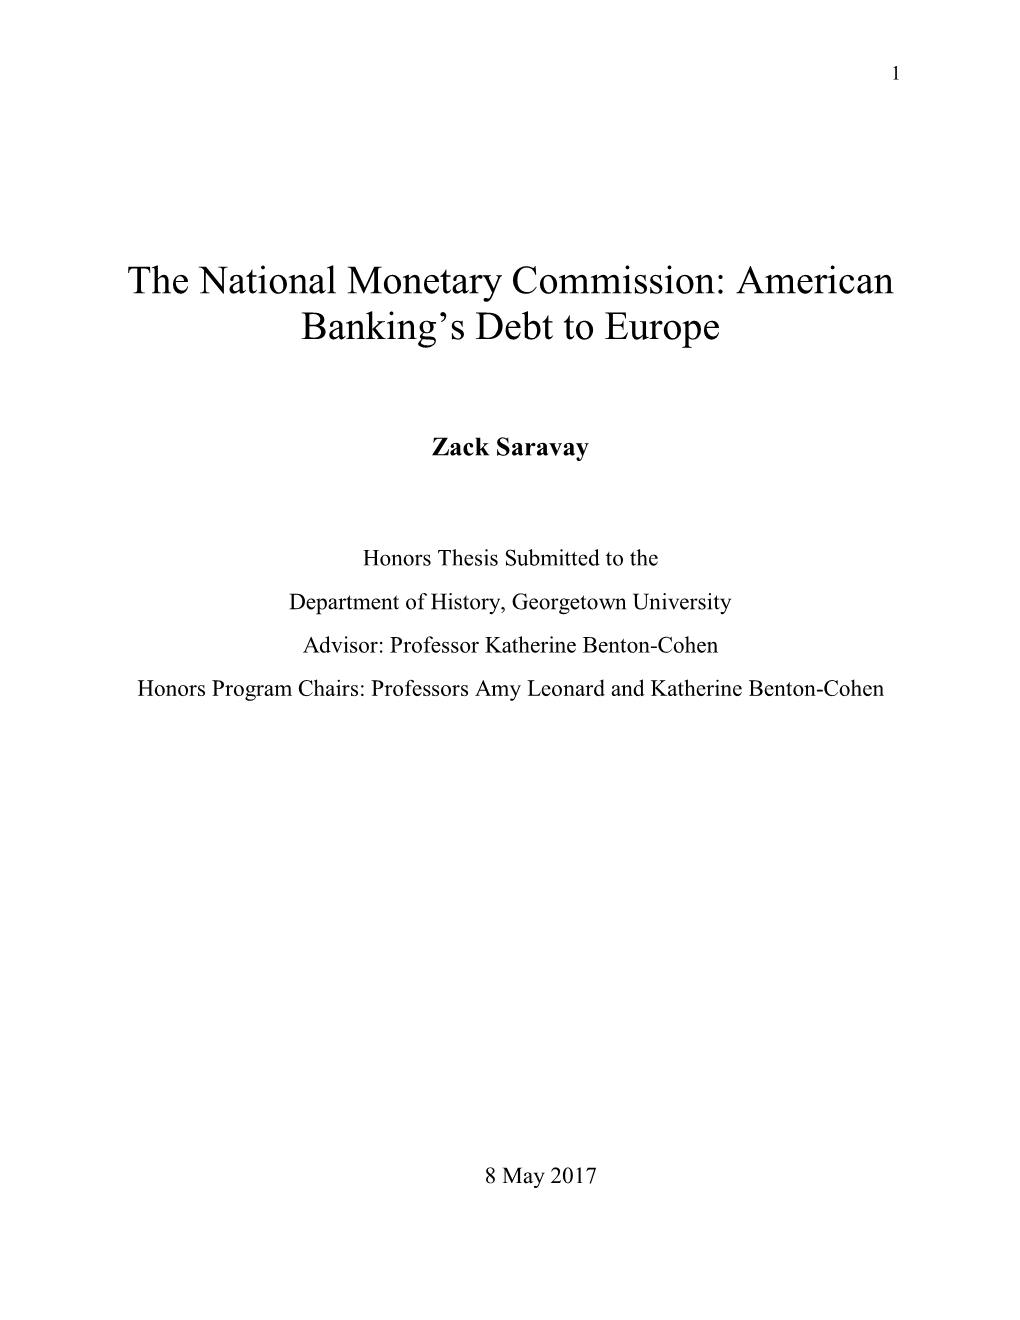 The National Monetary Commission: American Banking’S Debt to Europe